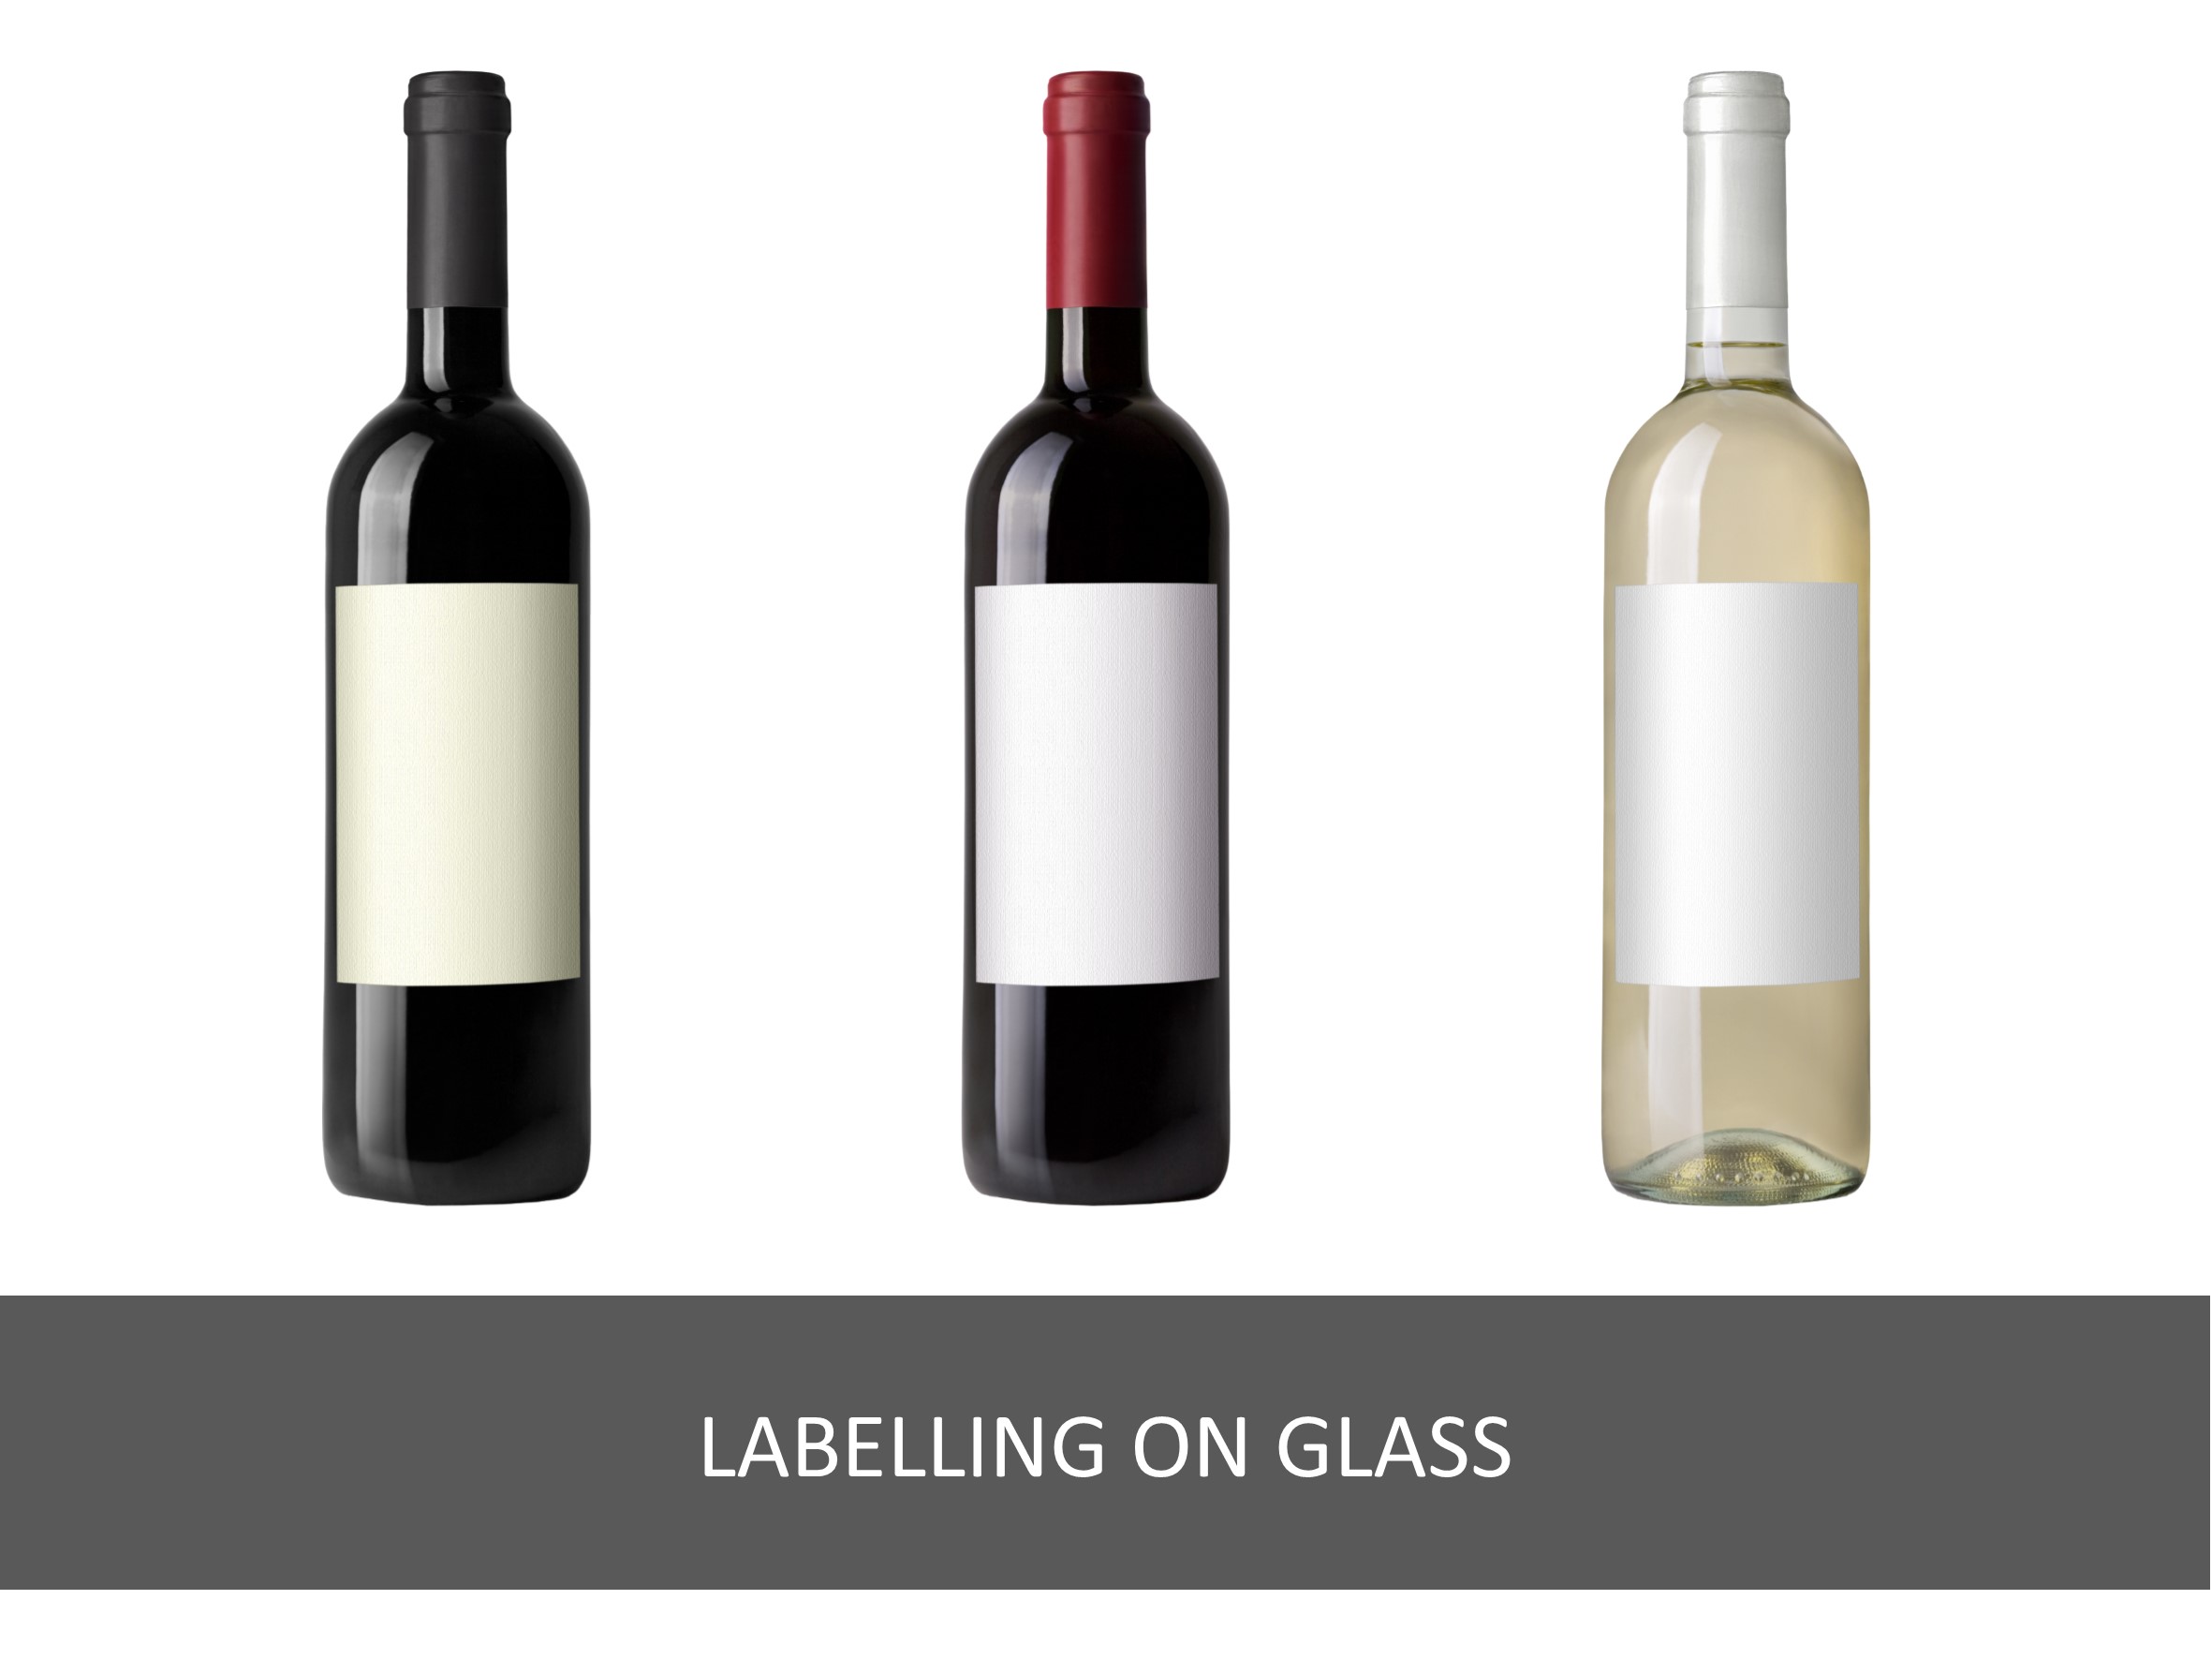 Labelling on glass